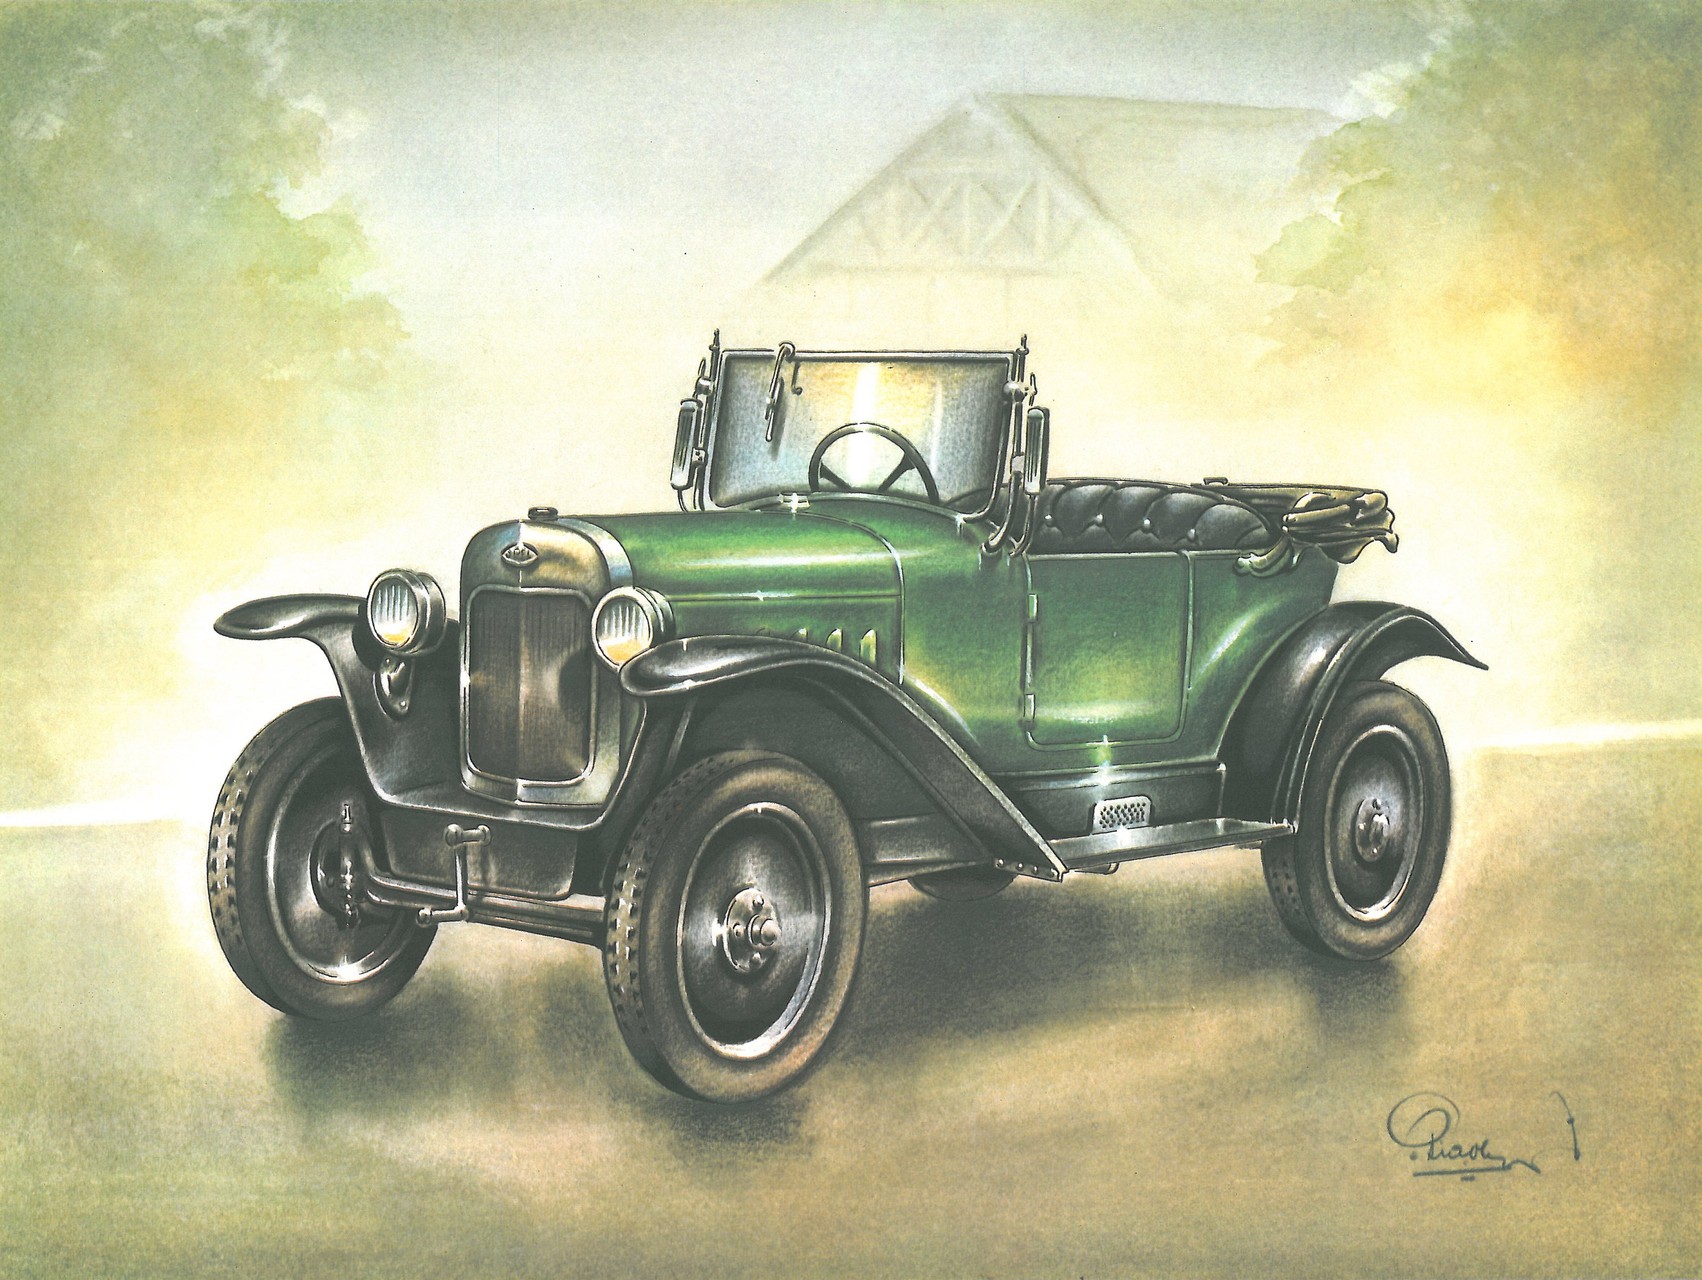 1923 Opel Laubfrosch: Illustrated by Piet Olyslager